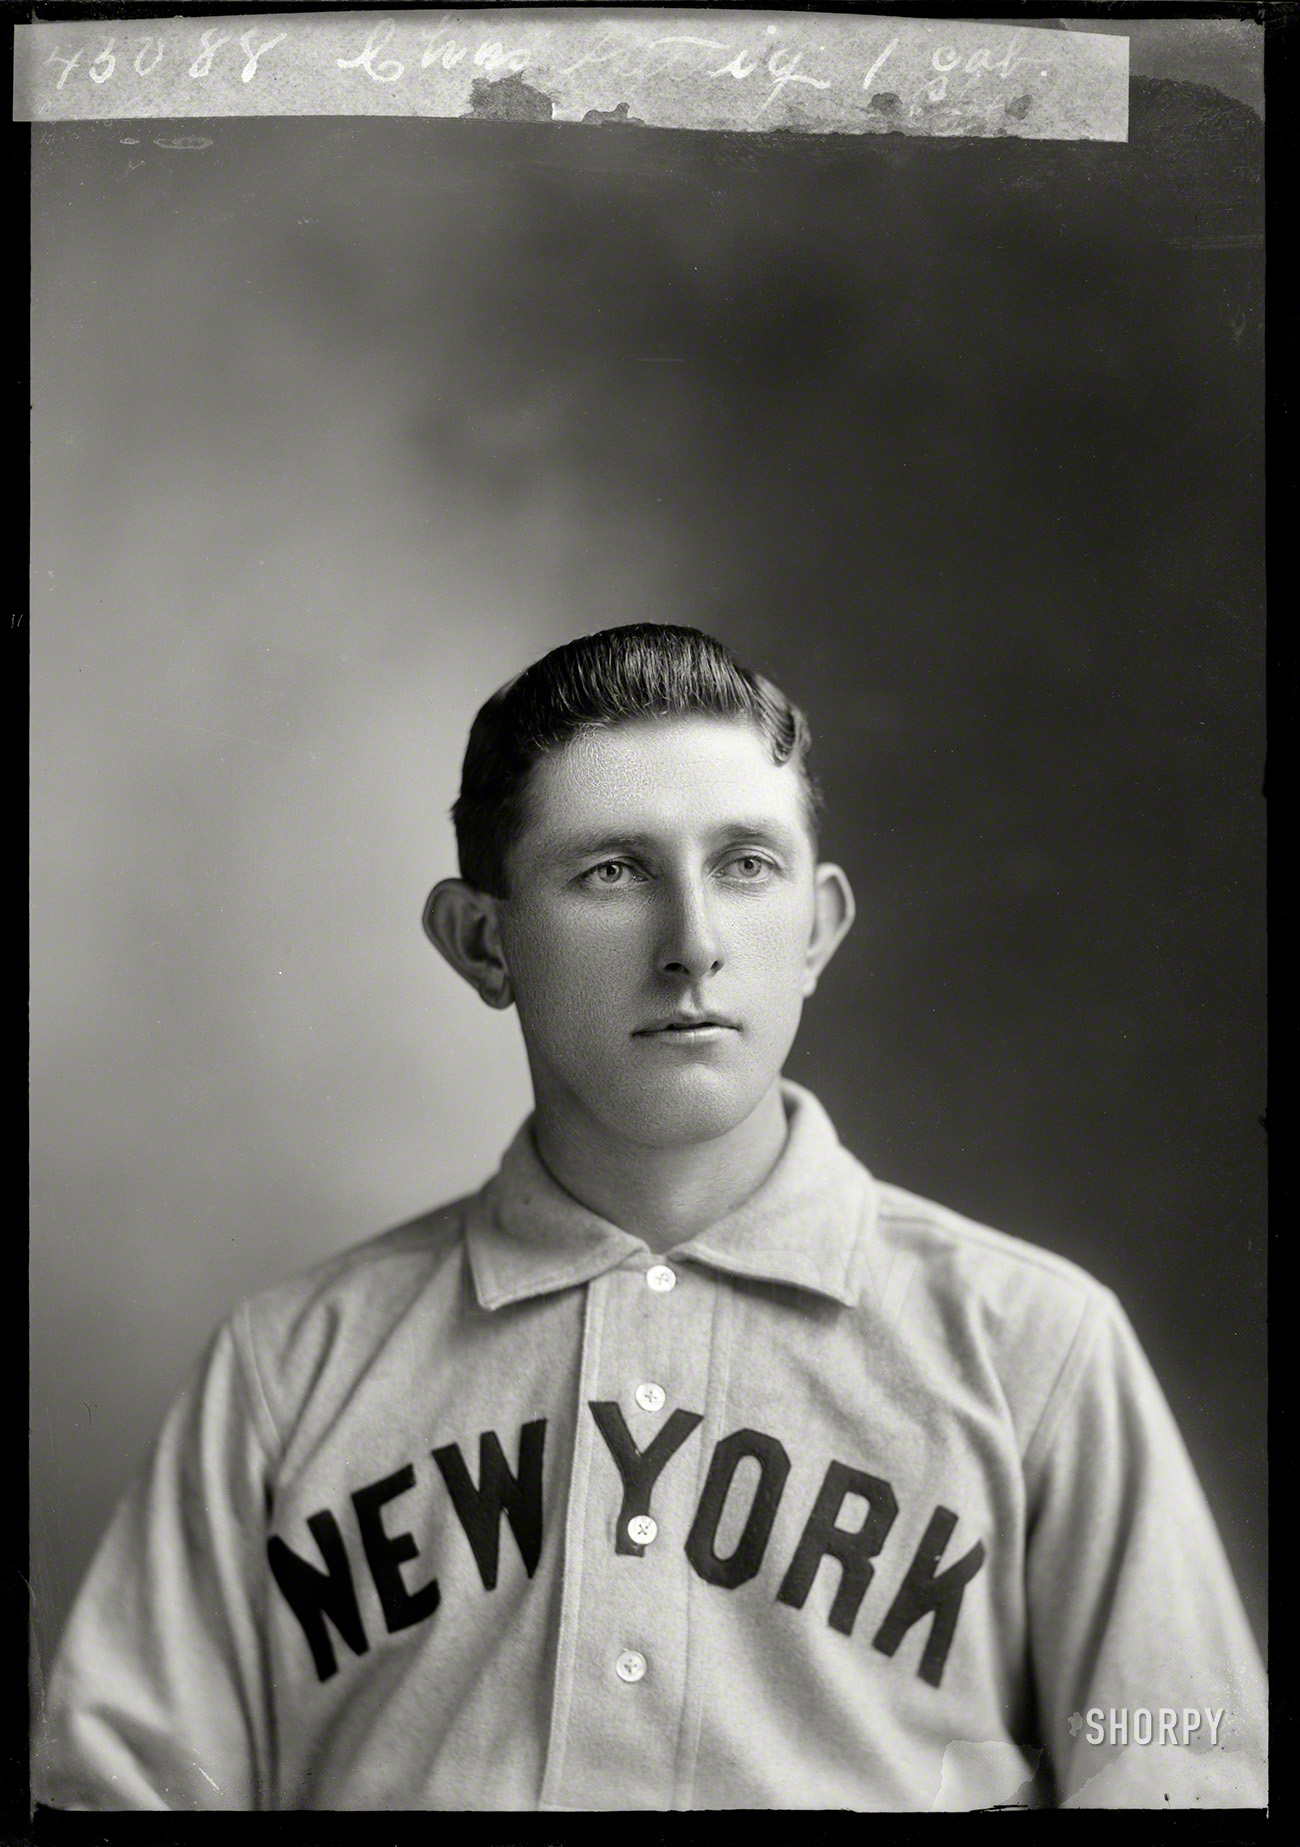 Washington, D.C., circa 1898. "Gettig, Chas. (New York baseball player)." Charlie Gettig, who played for the Giants. 5x7 inch glass negative. View full size.